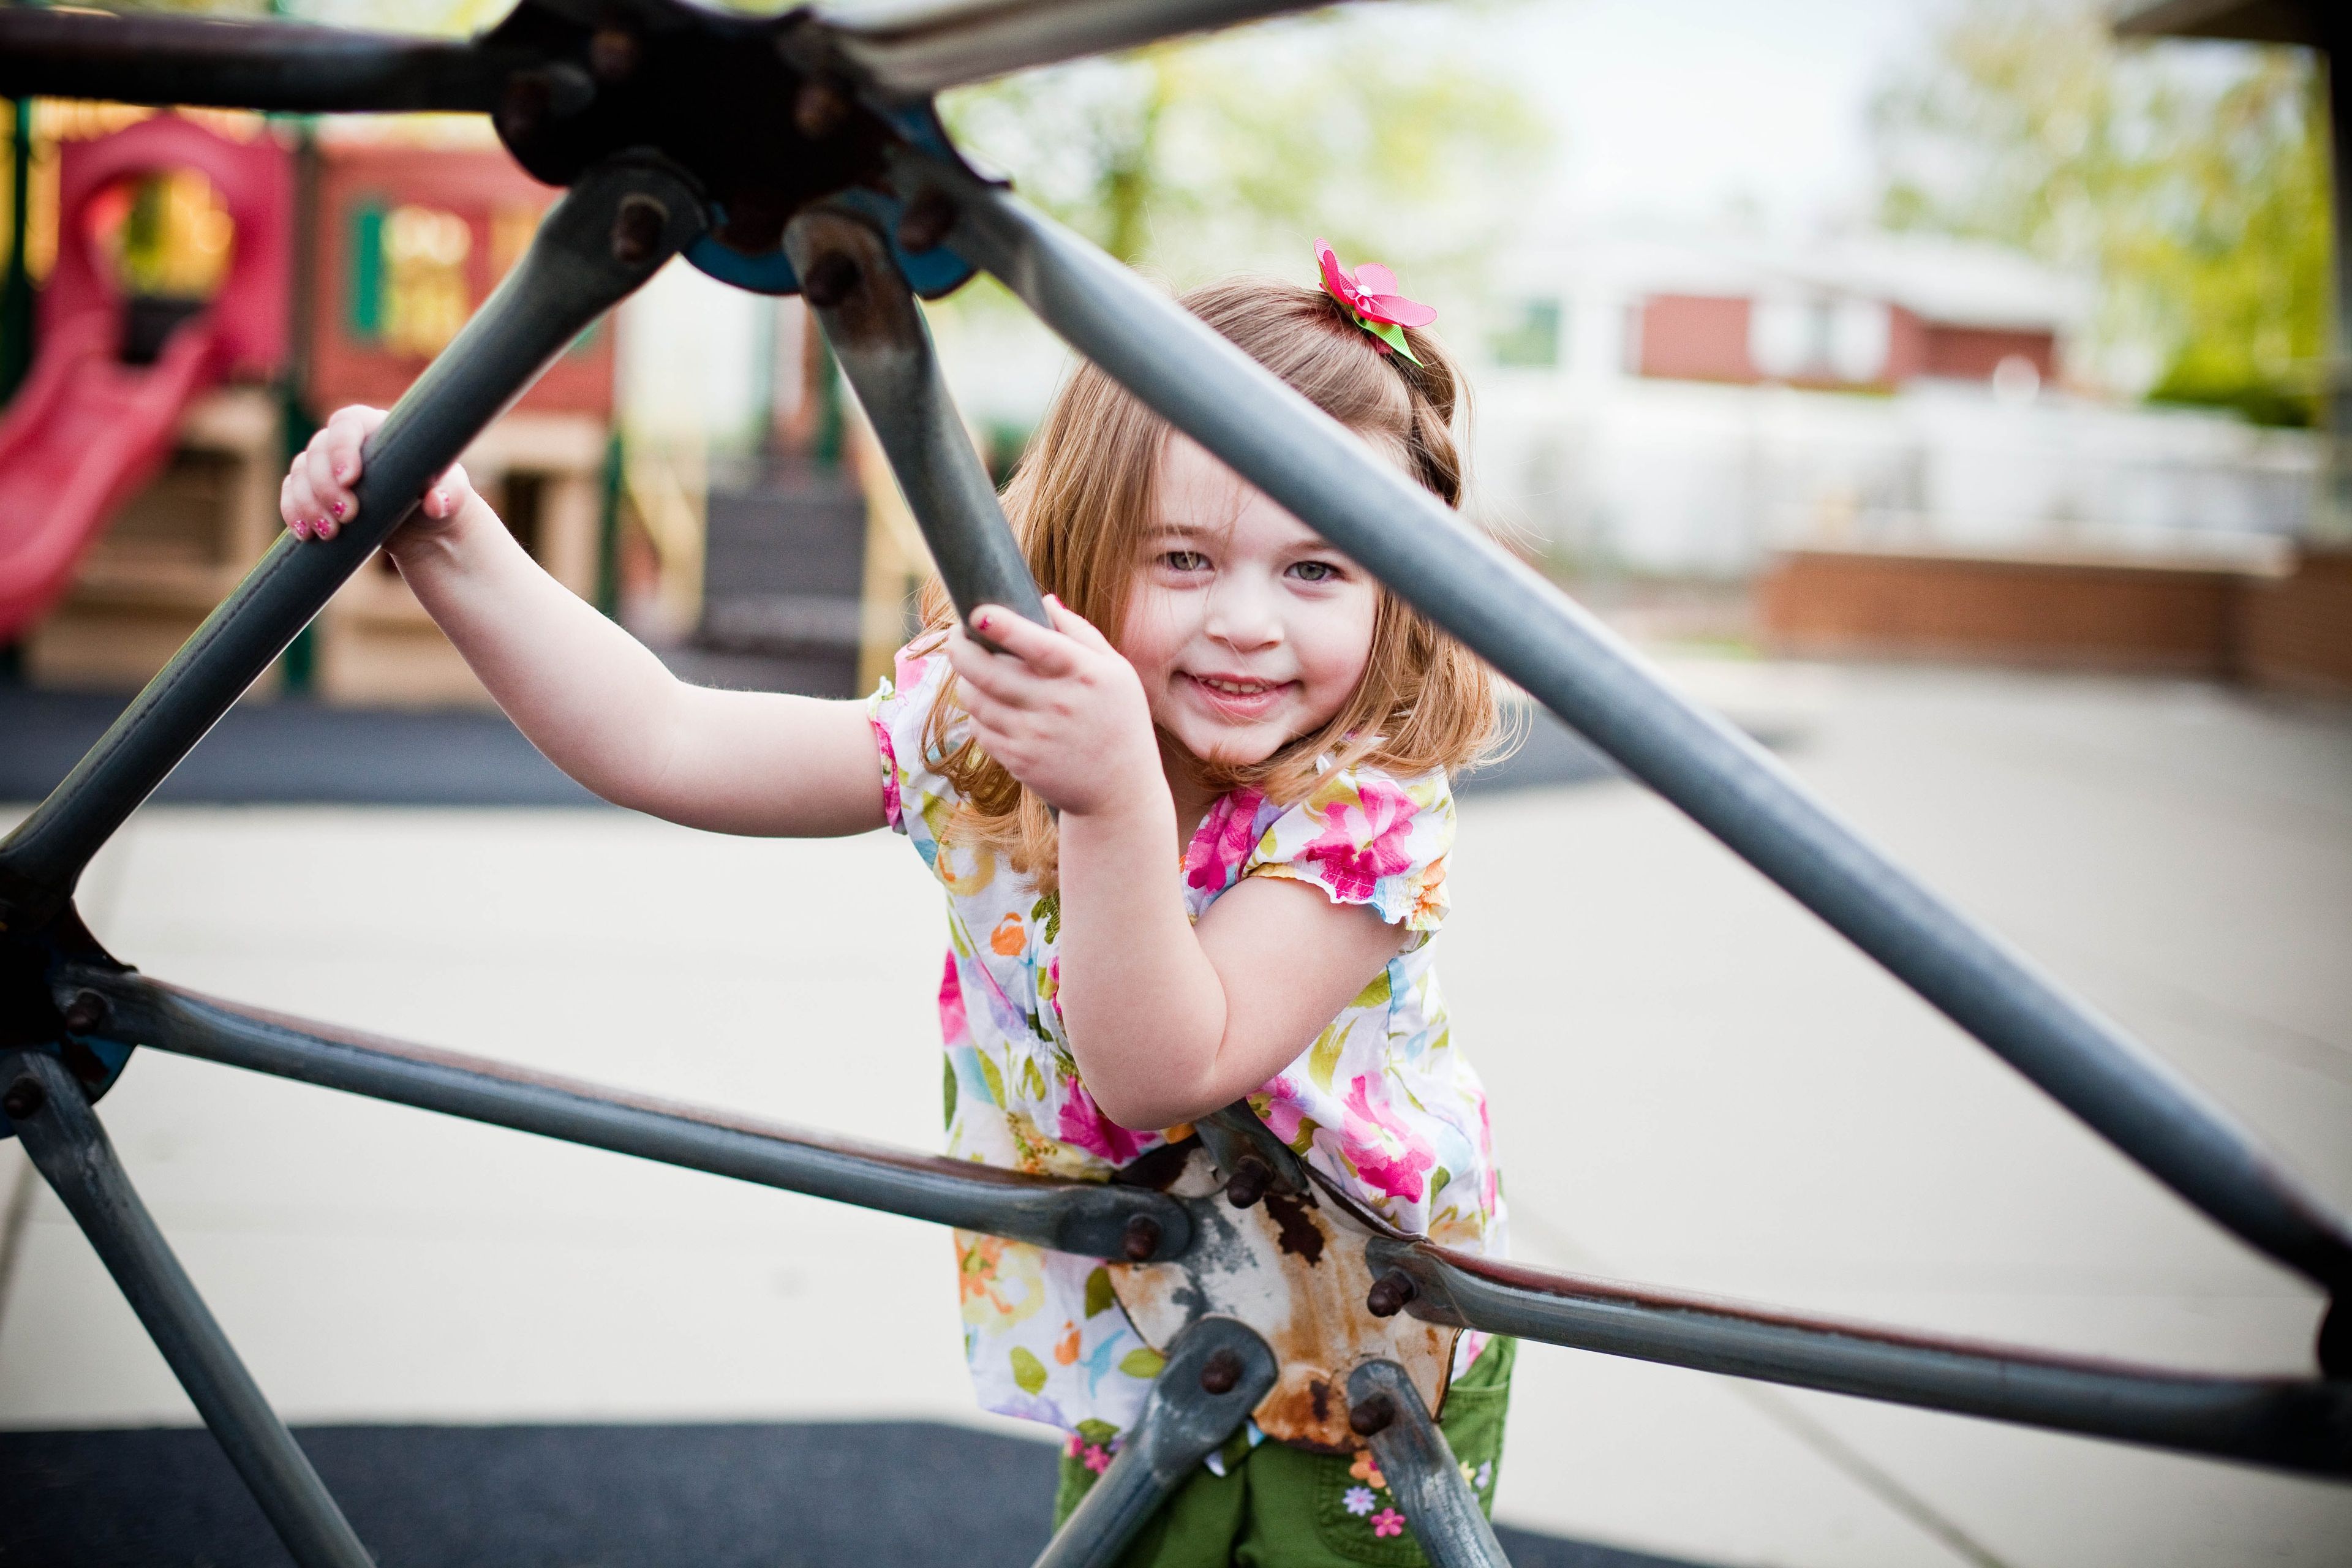 A little girl plays on a playground.